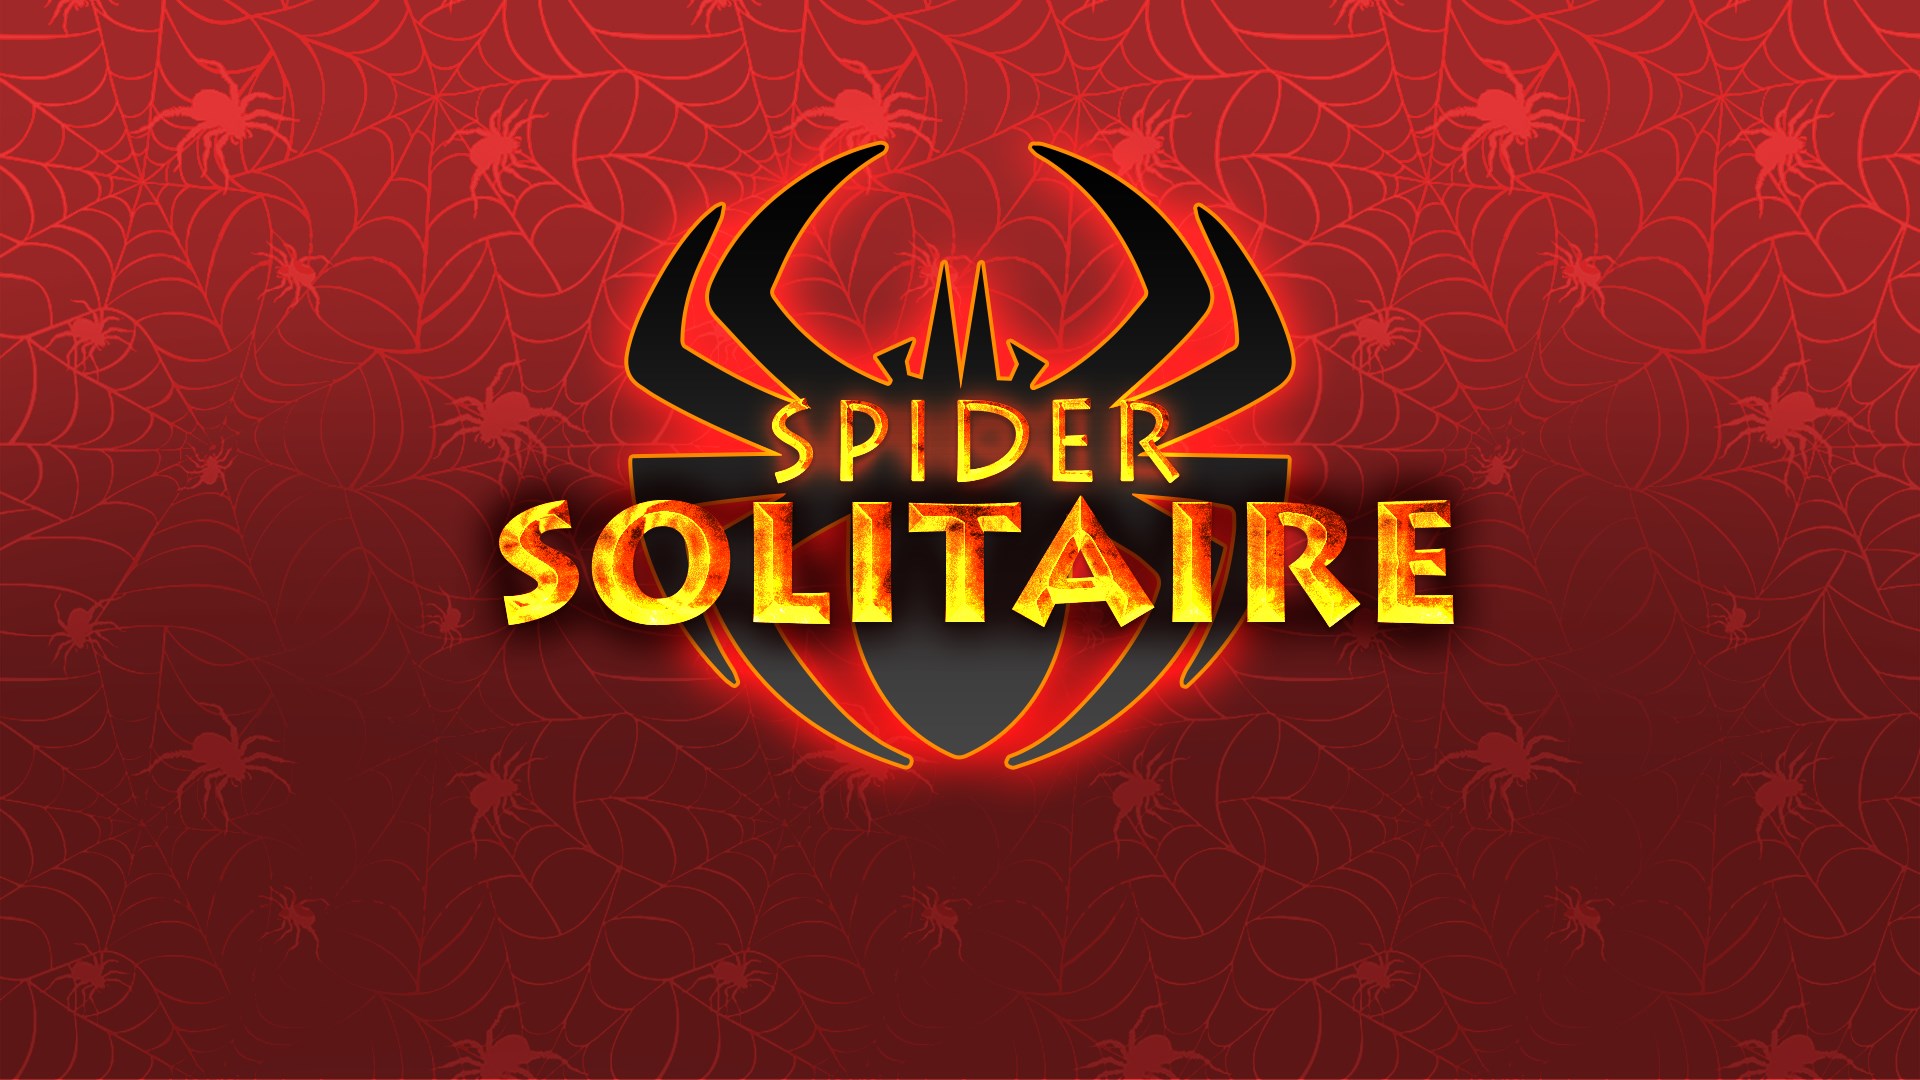 SPIDER SOLITAIRE CARD GAME